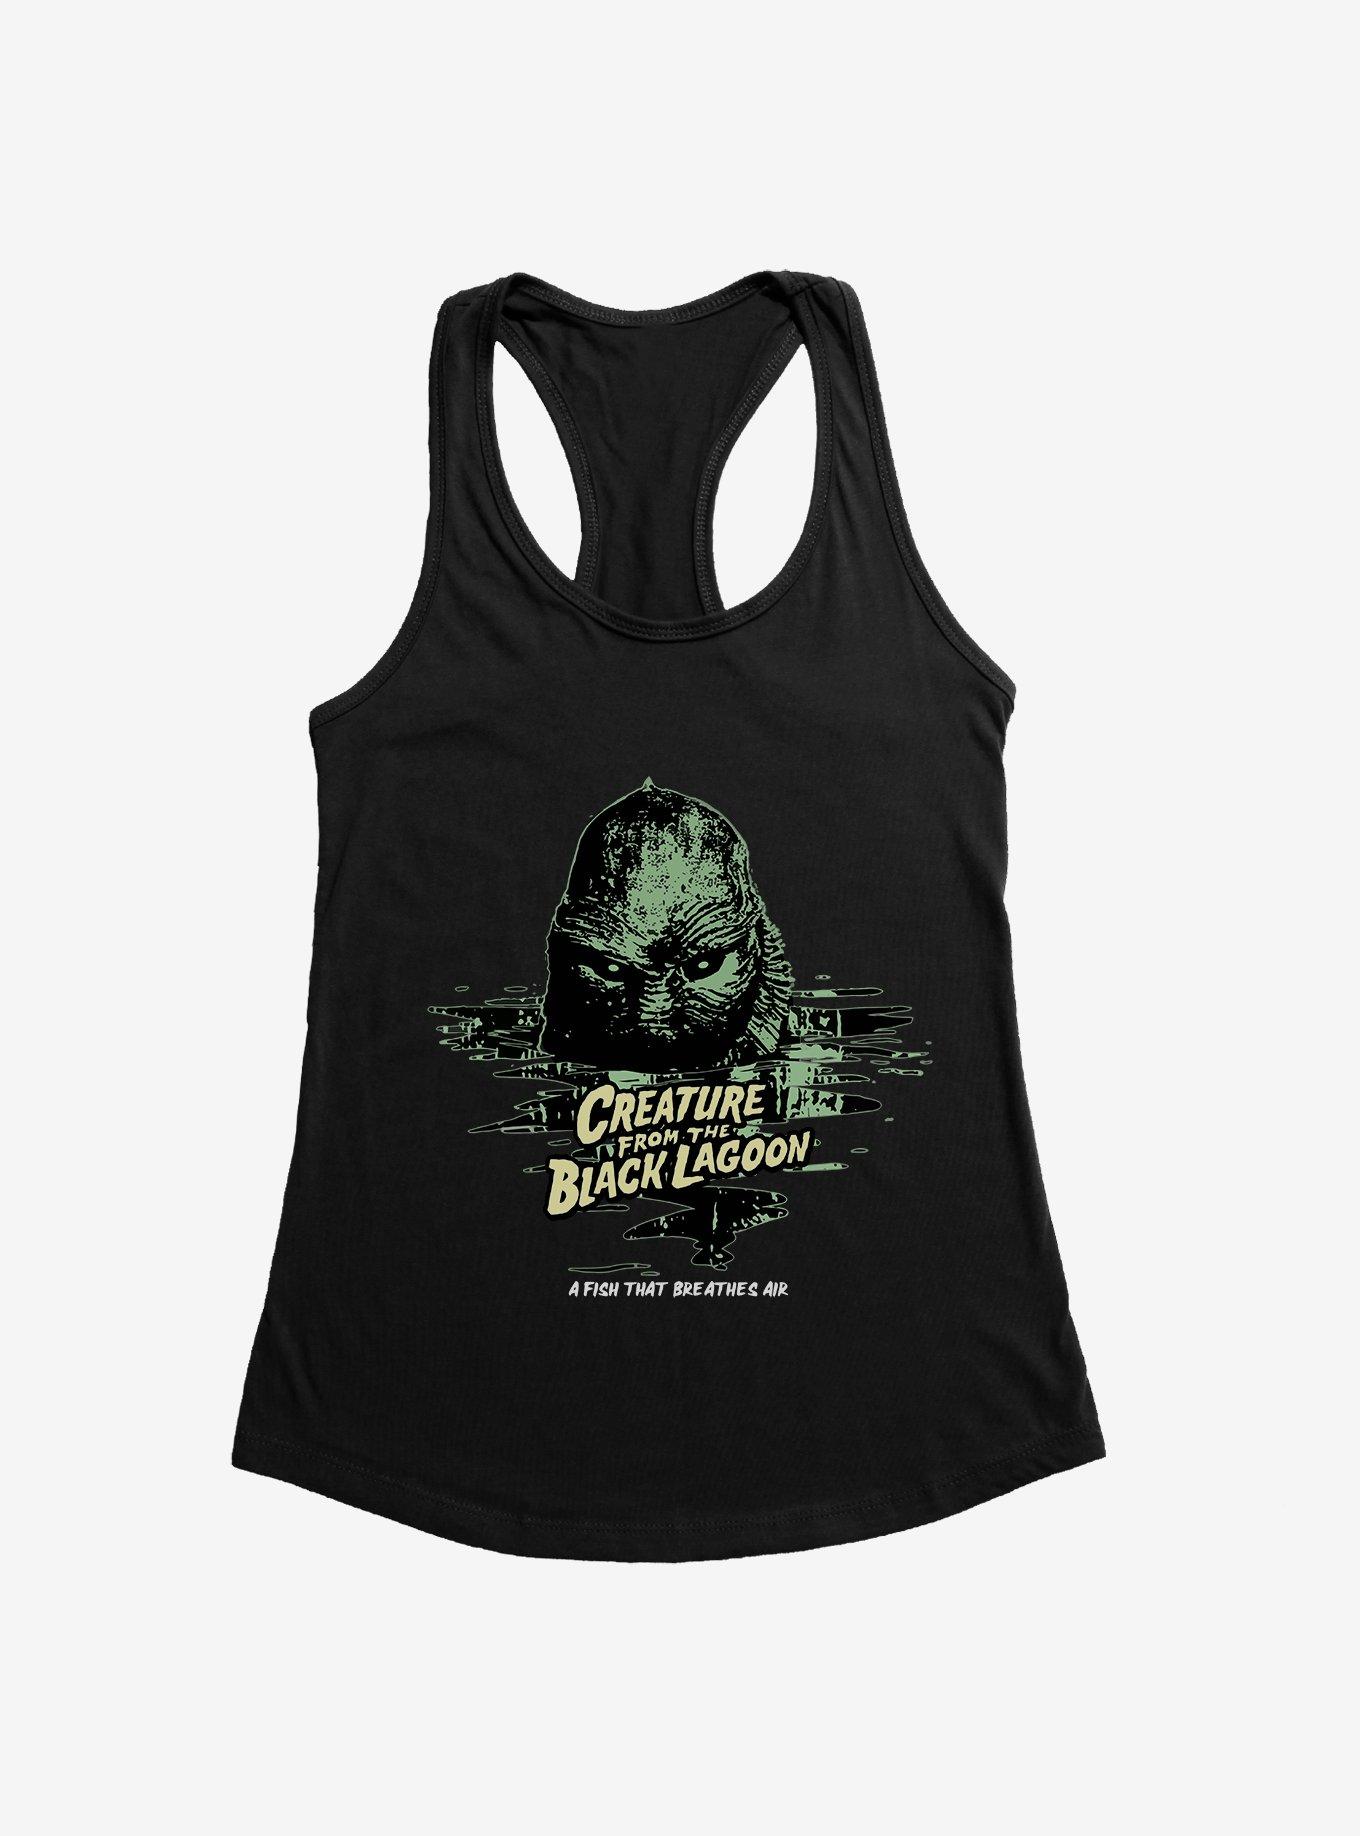 Creature From The Black Lagoon Fish That Breathes Air Girls Tank, BLACK, hi-res